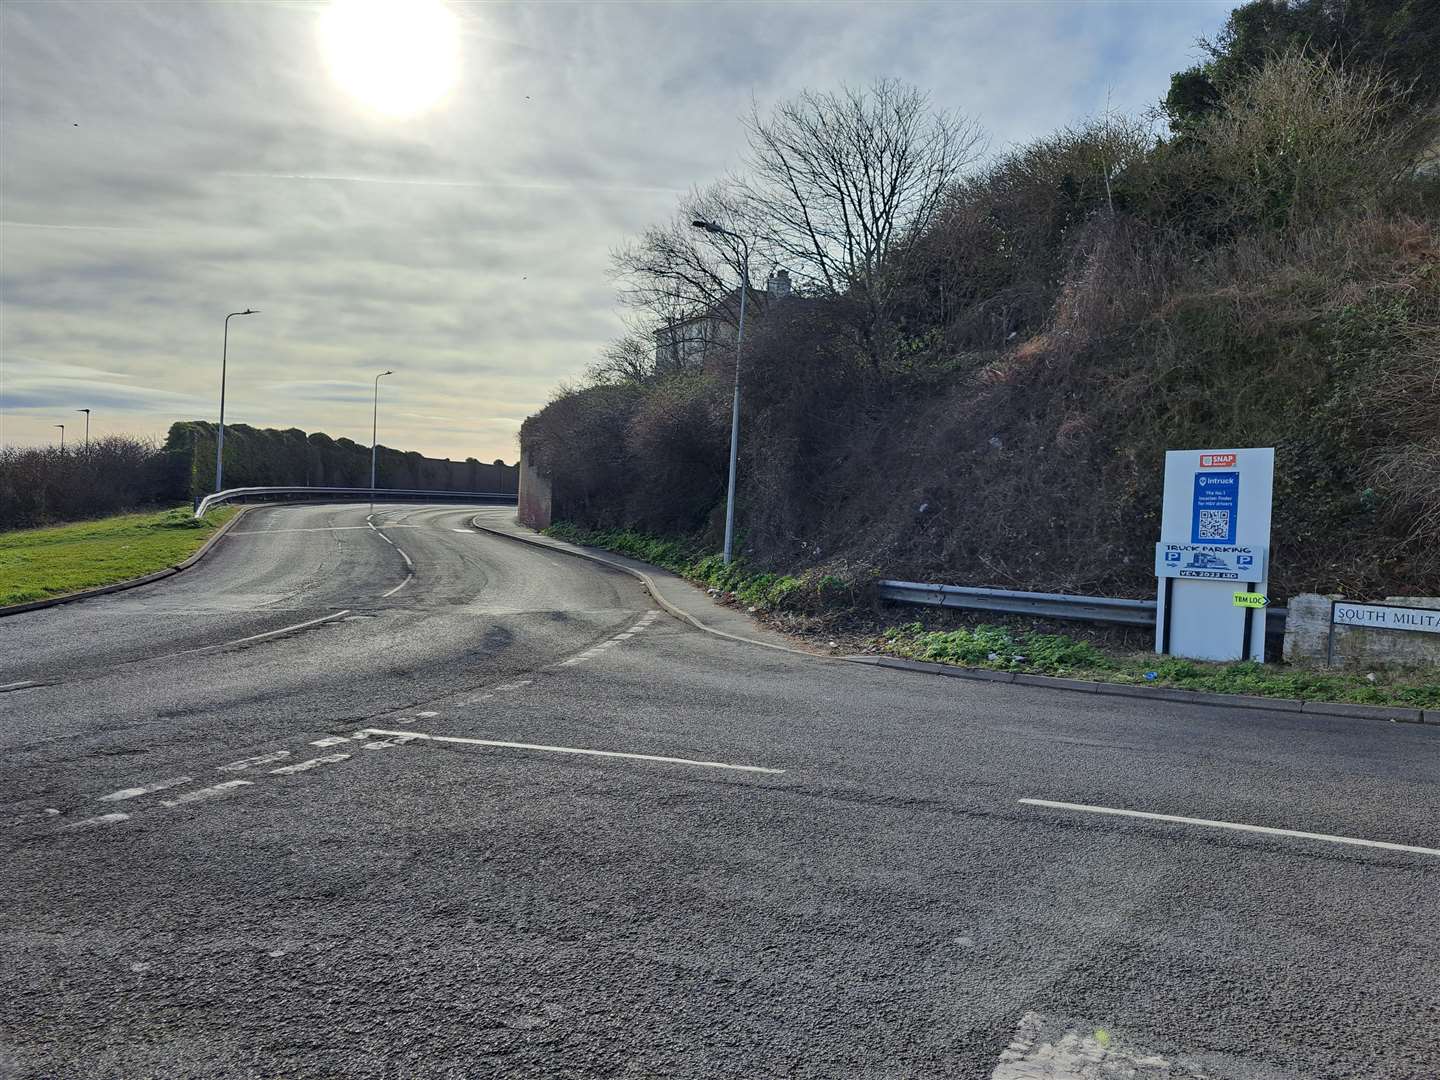 The sign is close to the Old Folkestone Road turn-off into Aycliffe but the arrows point the other way